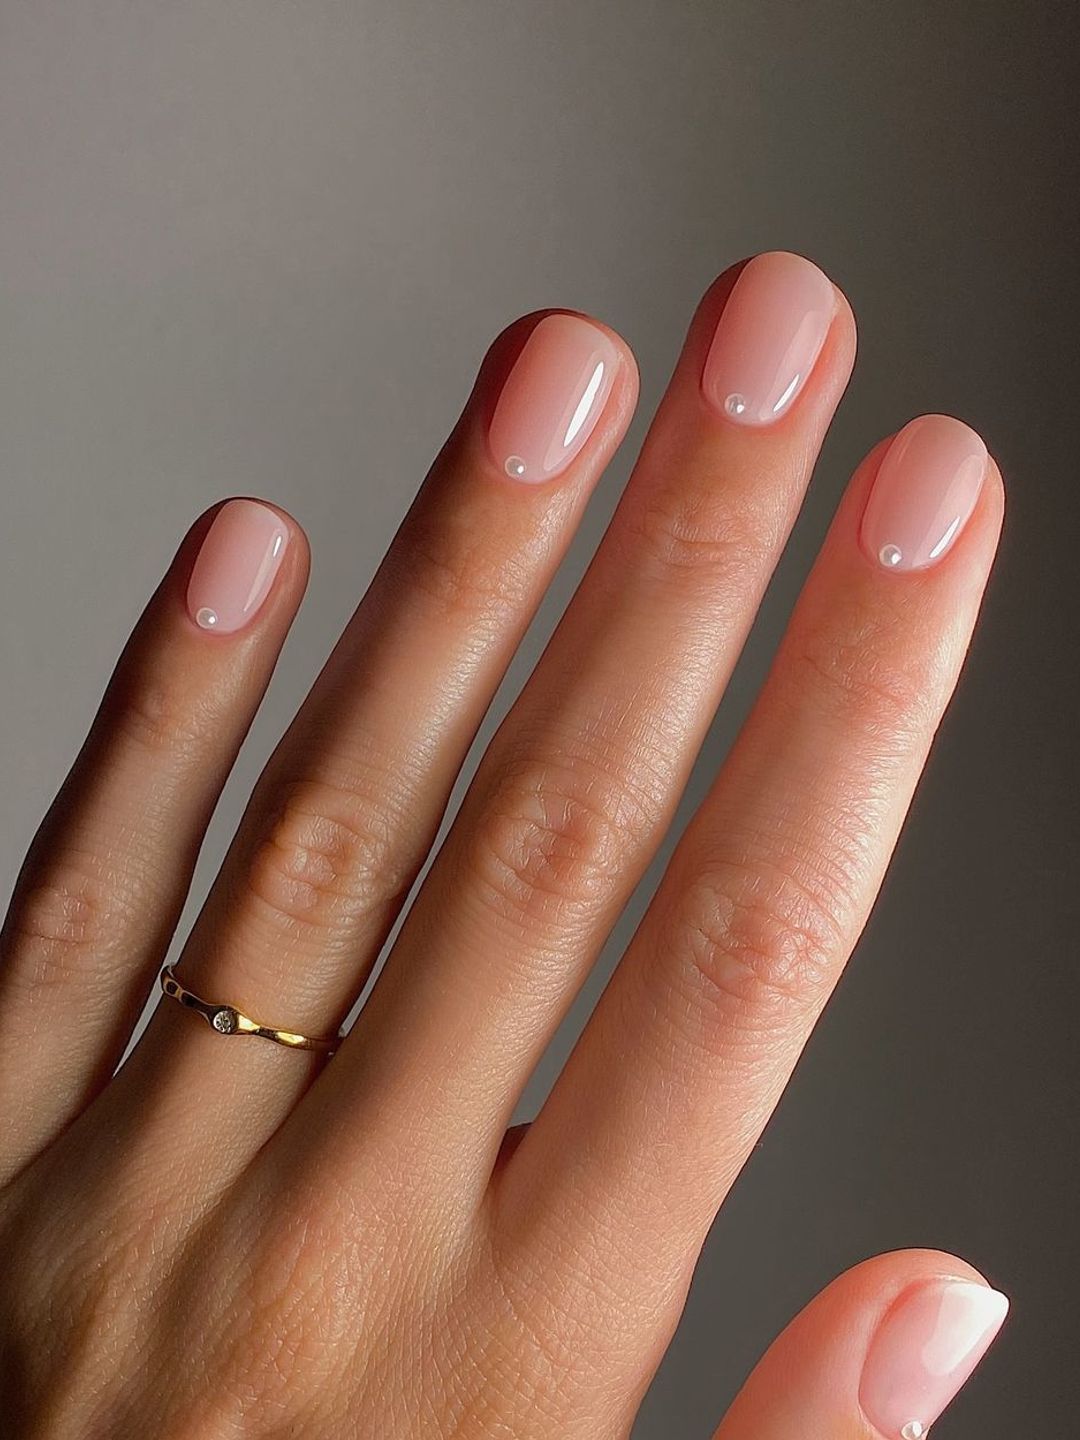 Neutral nails pearl accents 